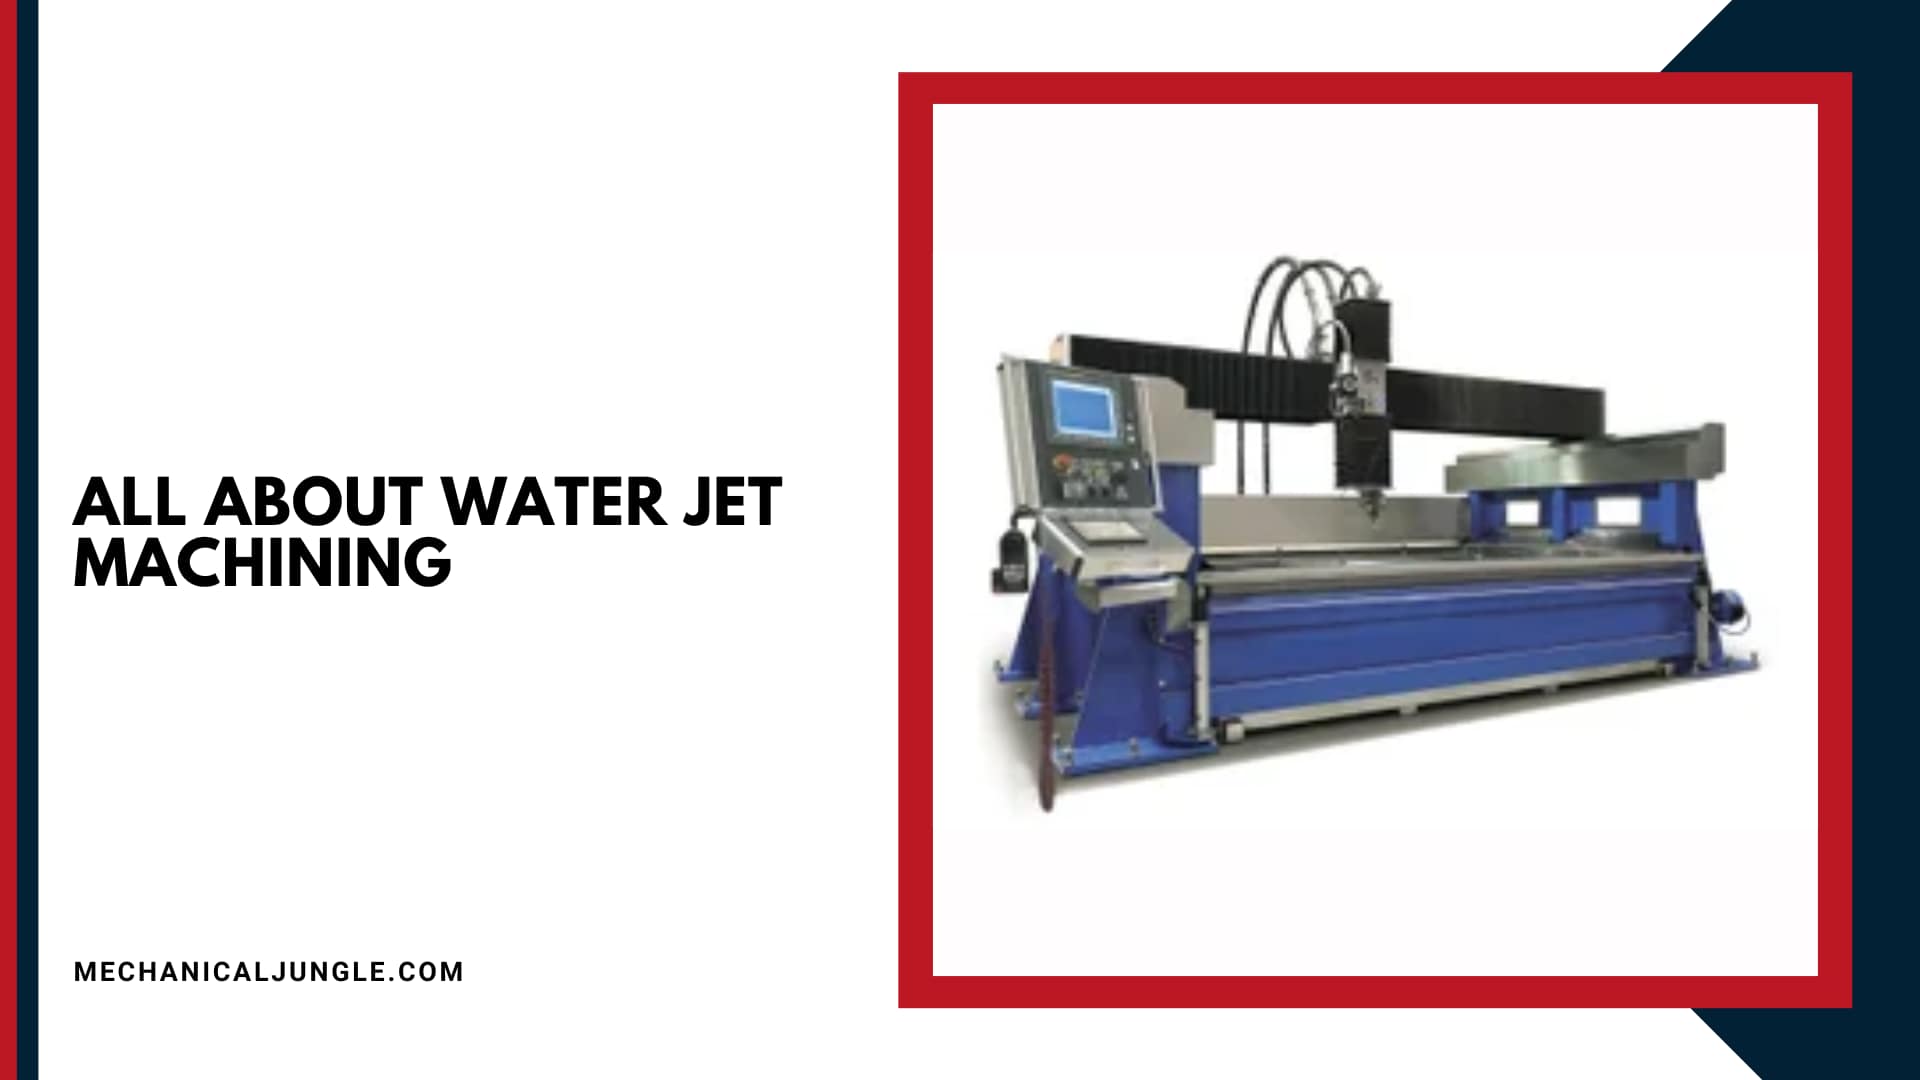 All About Water Jet Machining